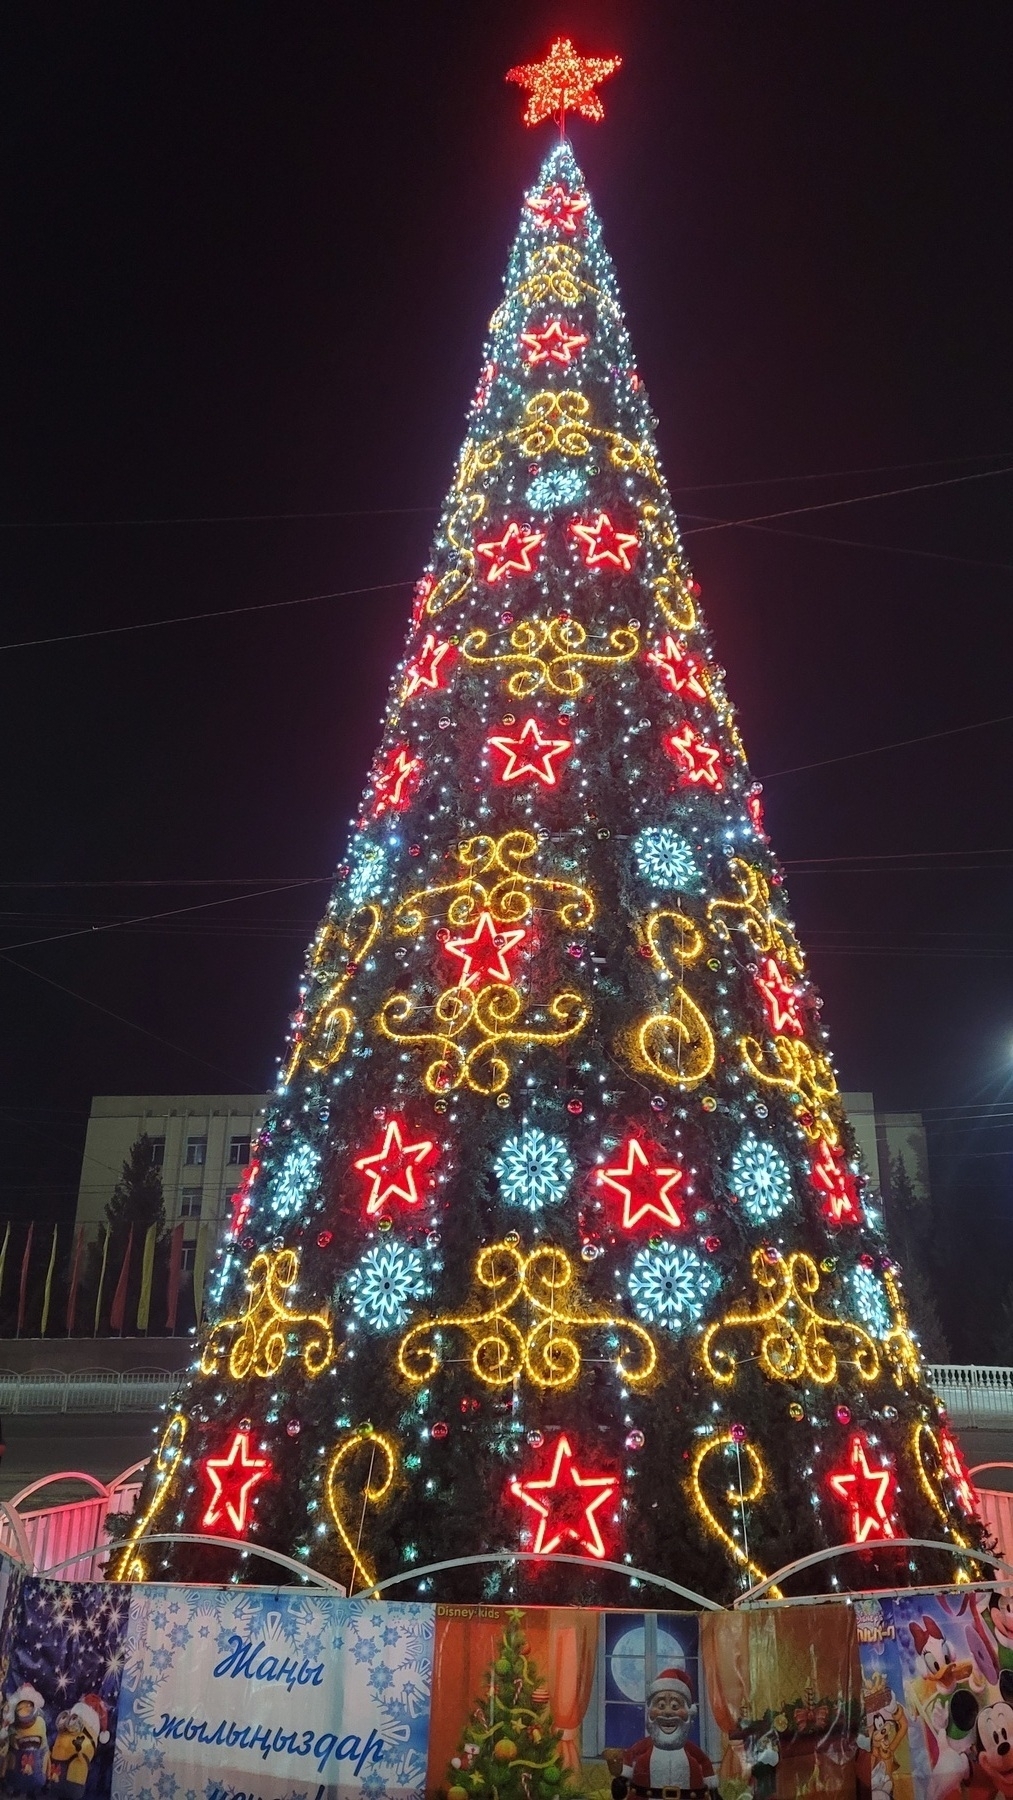 tall Christmas tree with decorative light patterns and ornaments. star at the top. sign in front which reads "Happy New Year" in Kyrgyz